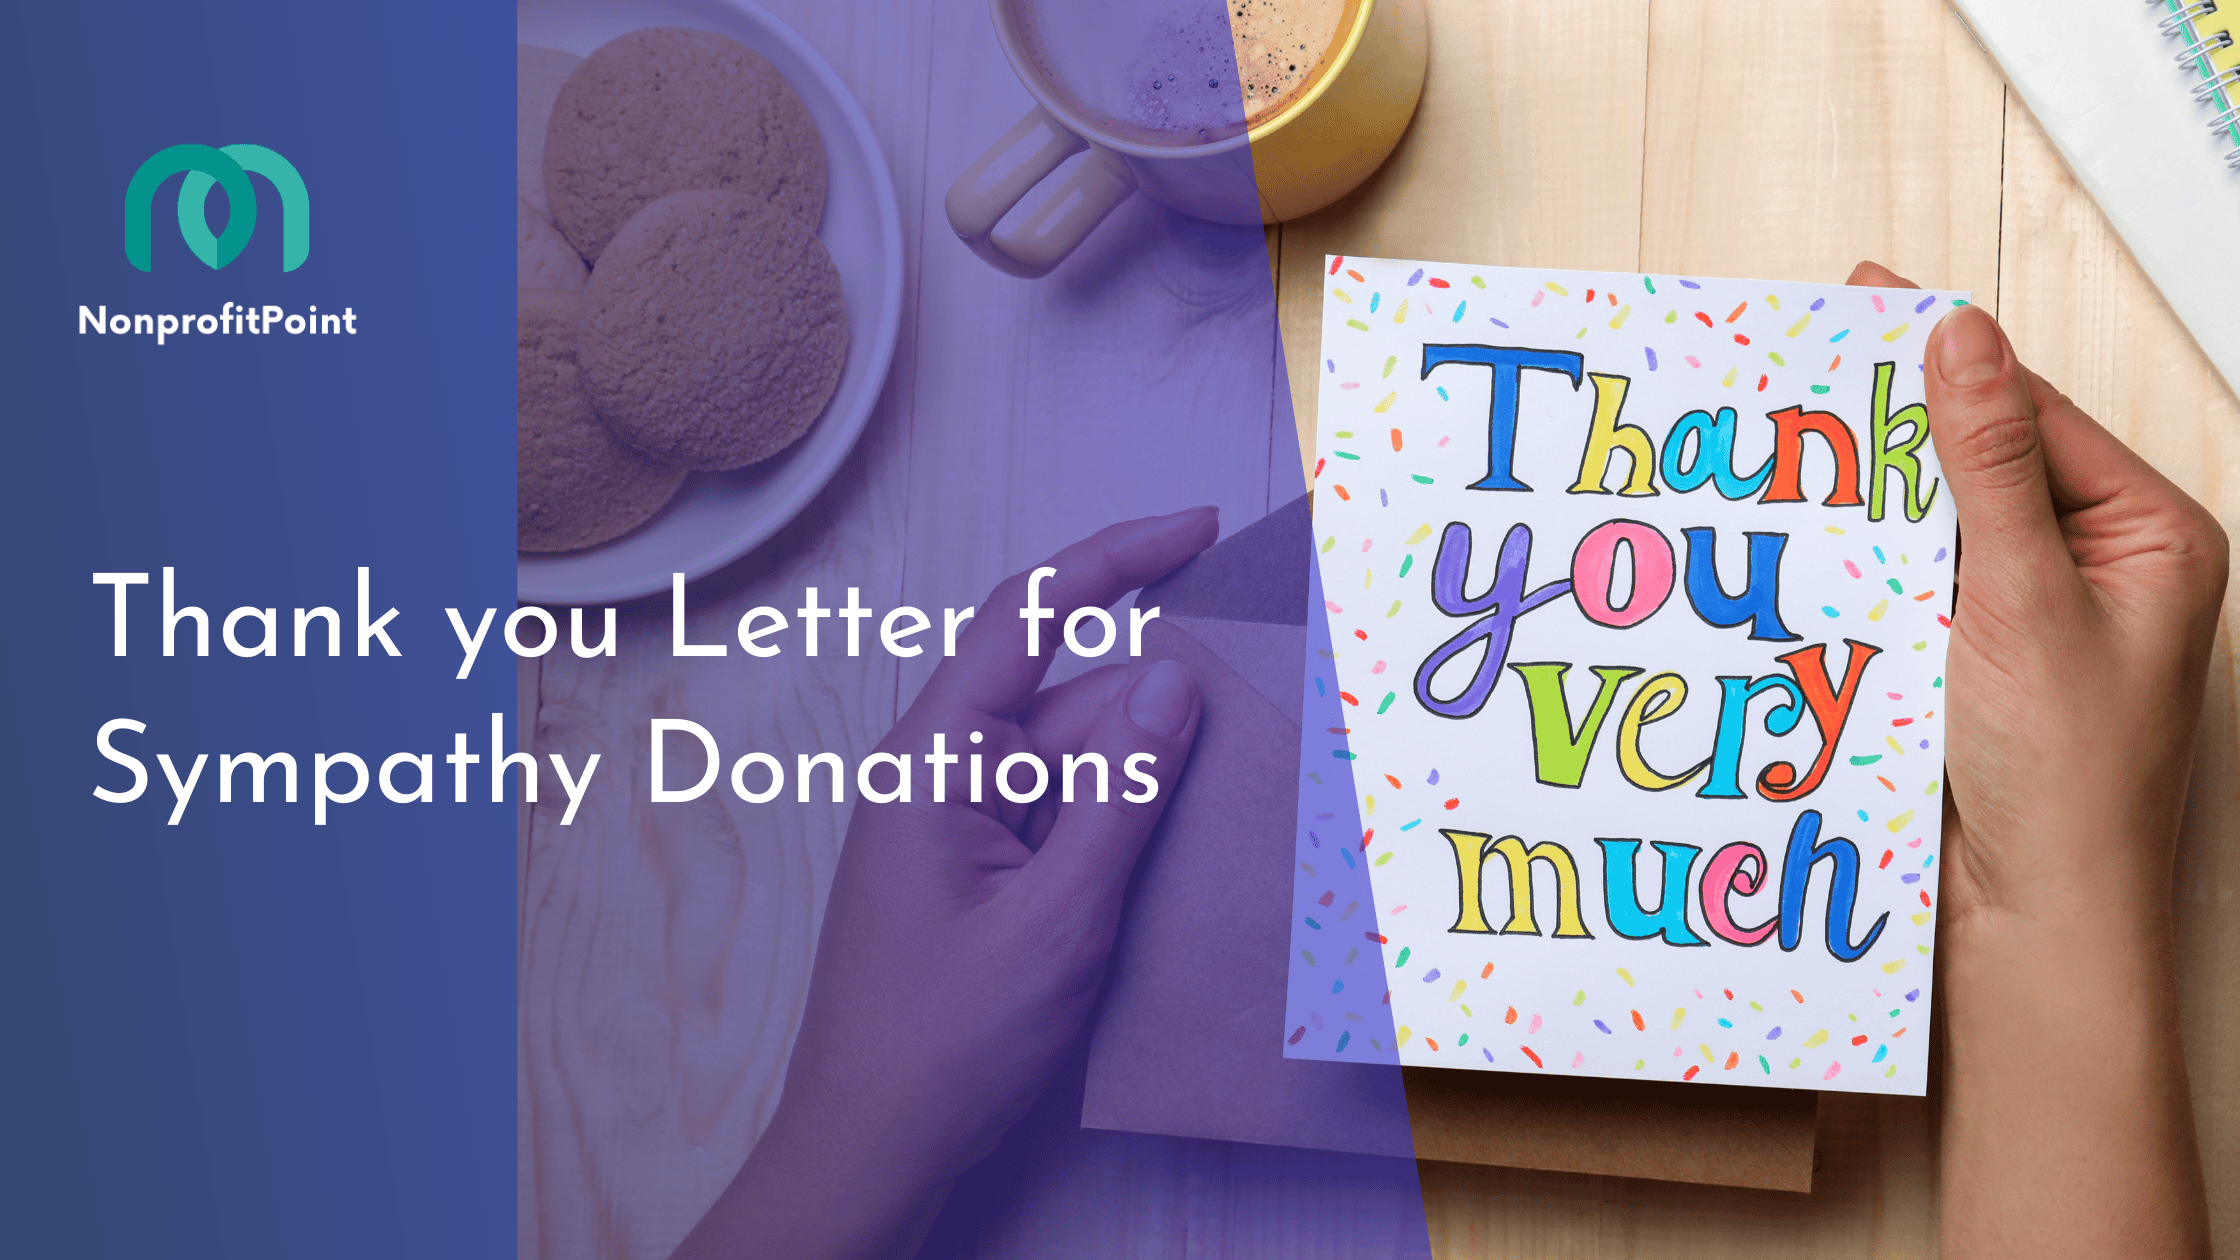 Thank you Letter for Sympathy Donations